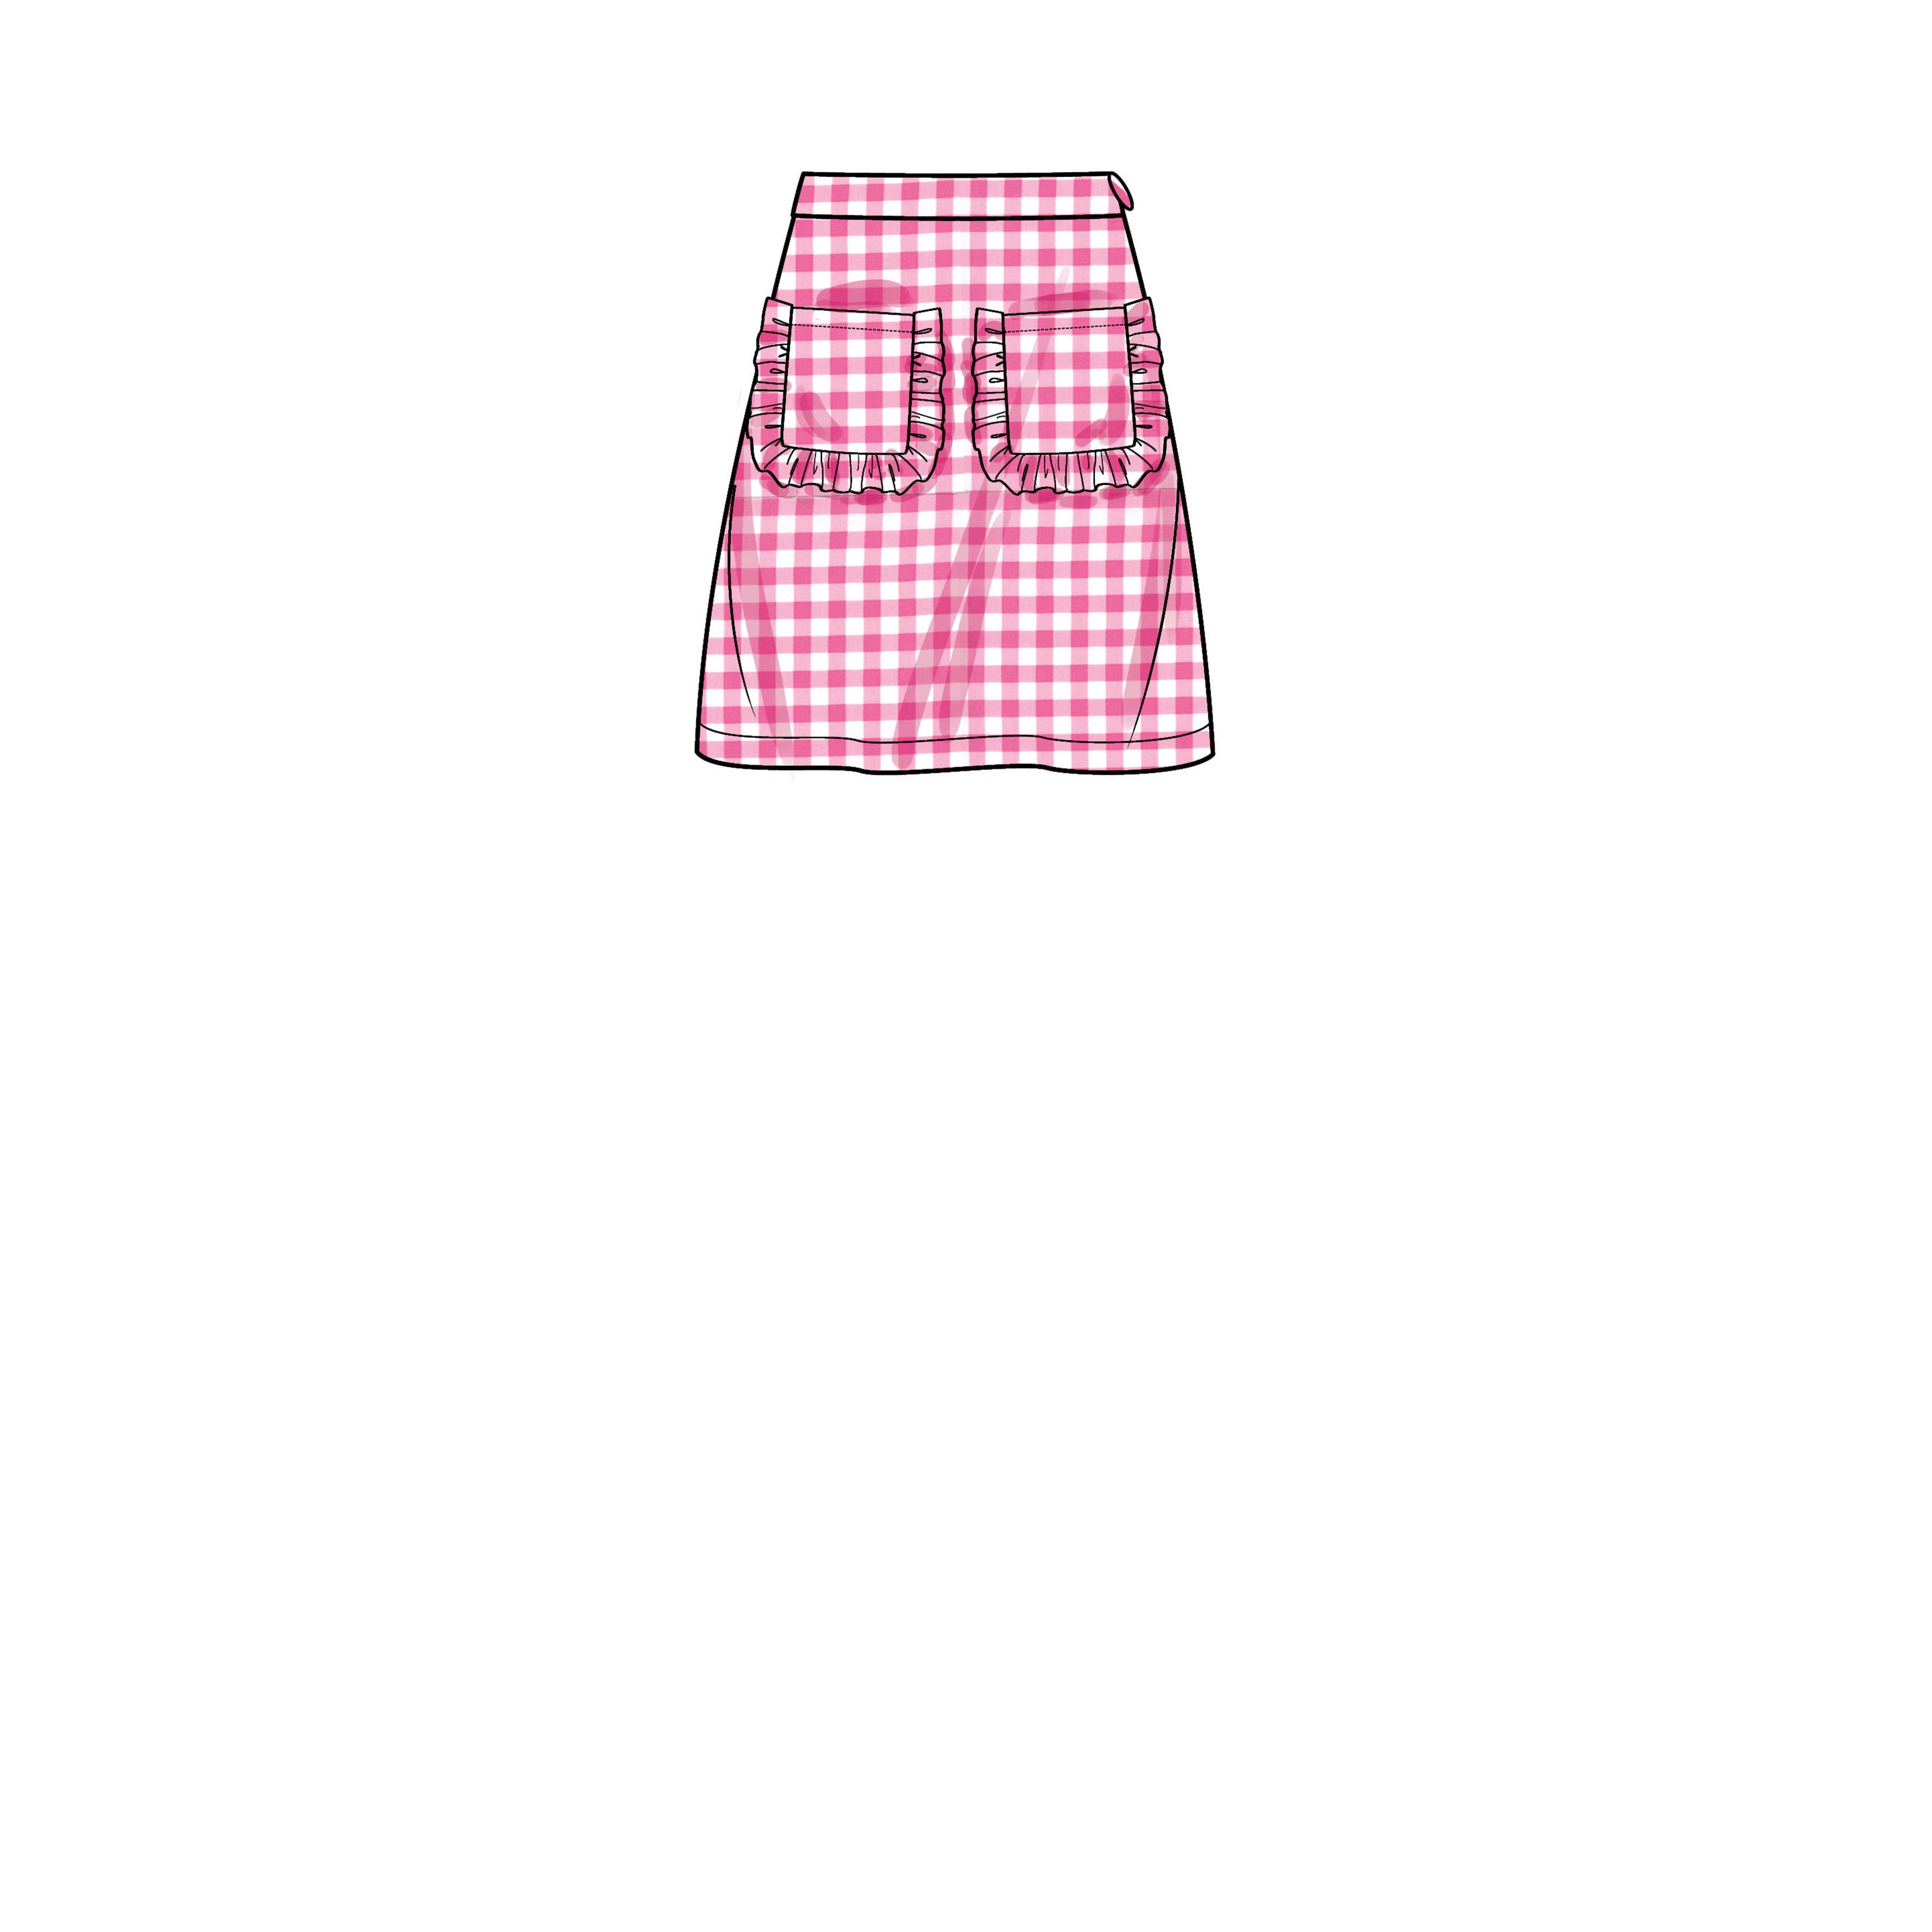 Simplicity sewing pattern 9654 Girls' Jacket, Trousers and Skirt from Jaycotts Sewing Supplies